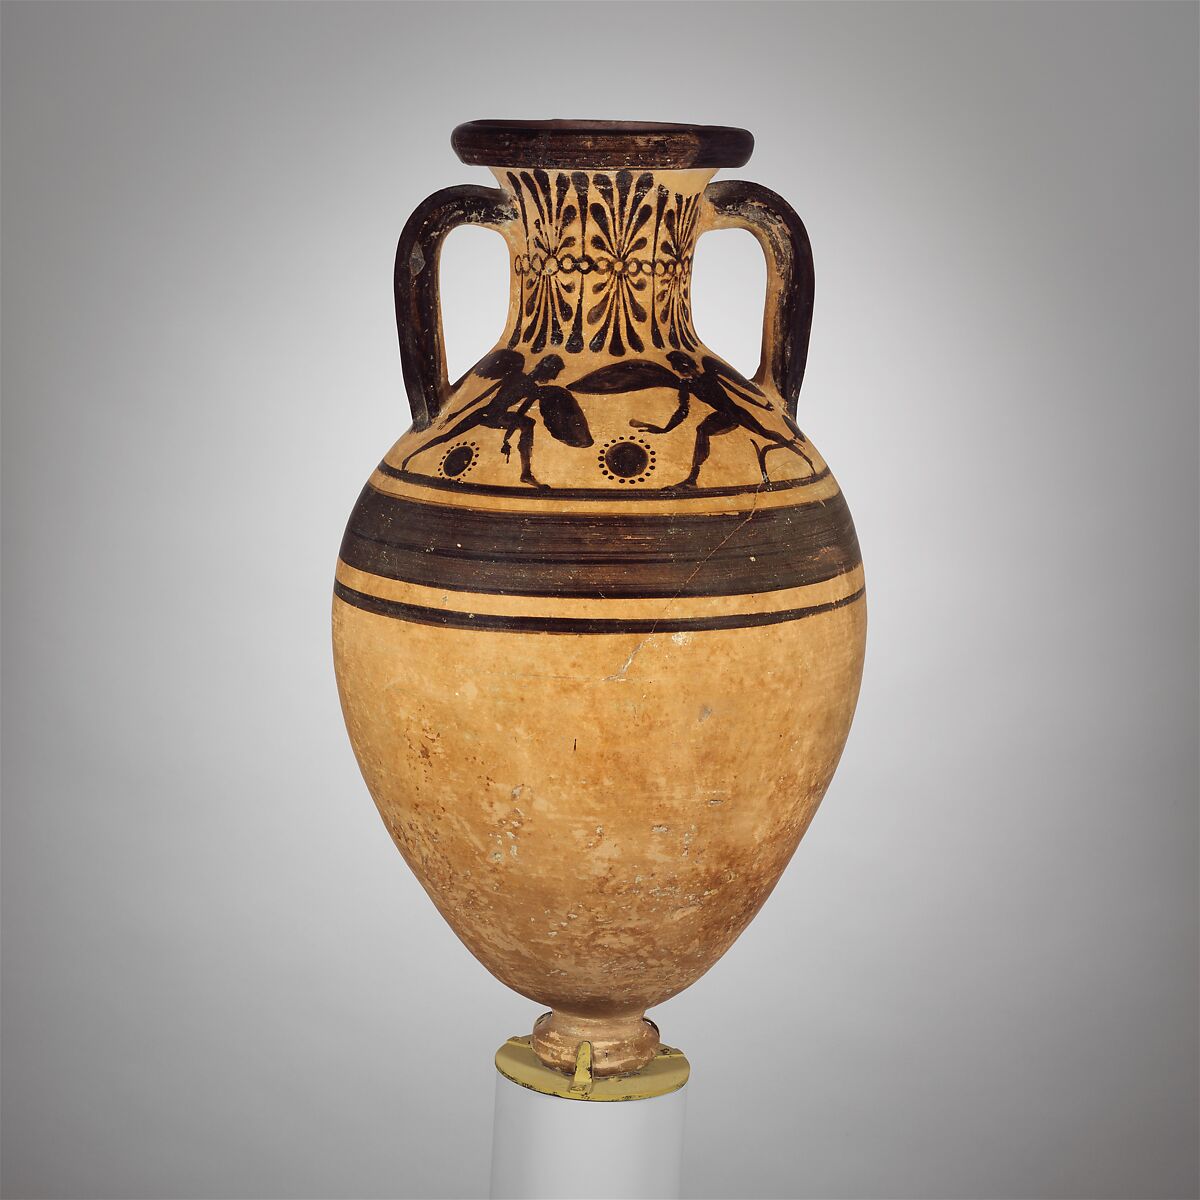 Terracotta neck-amphora (jar), Attributed to the Group of New York GR 517, Terracotta, Etruscan 